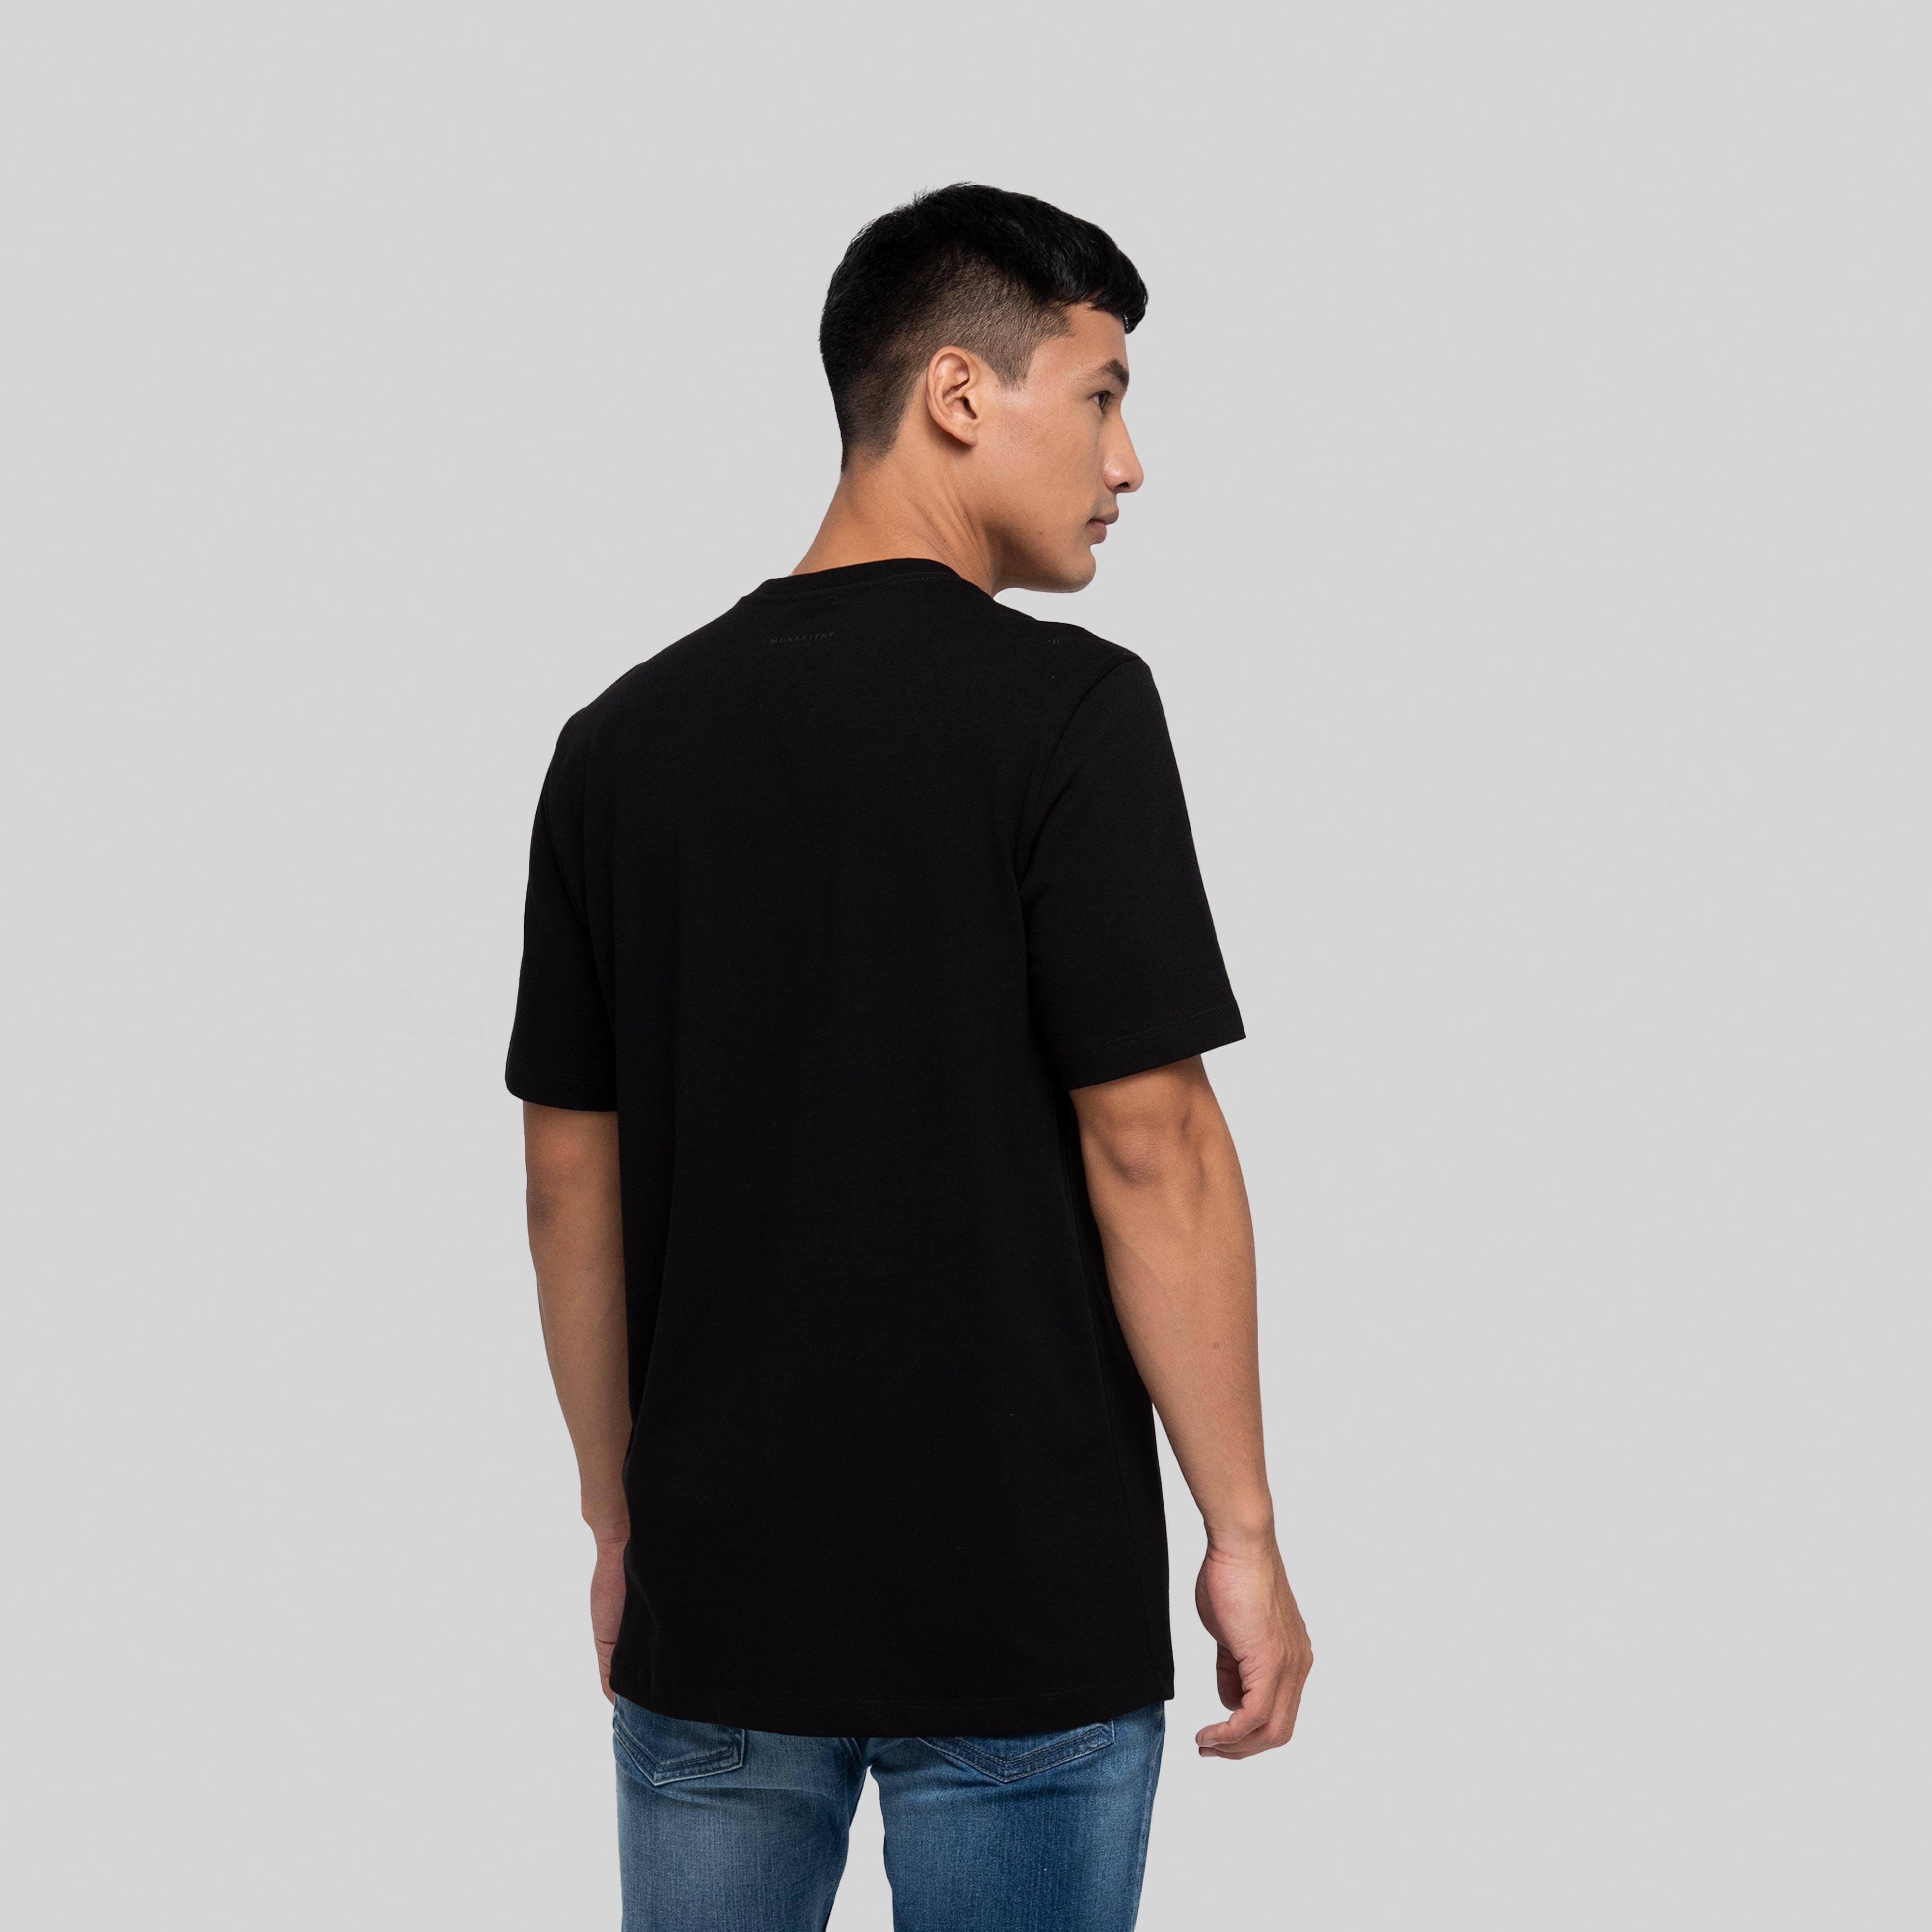 ZAGROS BLACK T-SHIRT | Monastery Couture